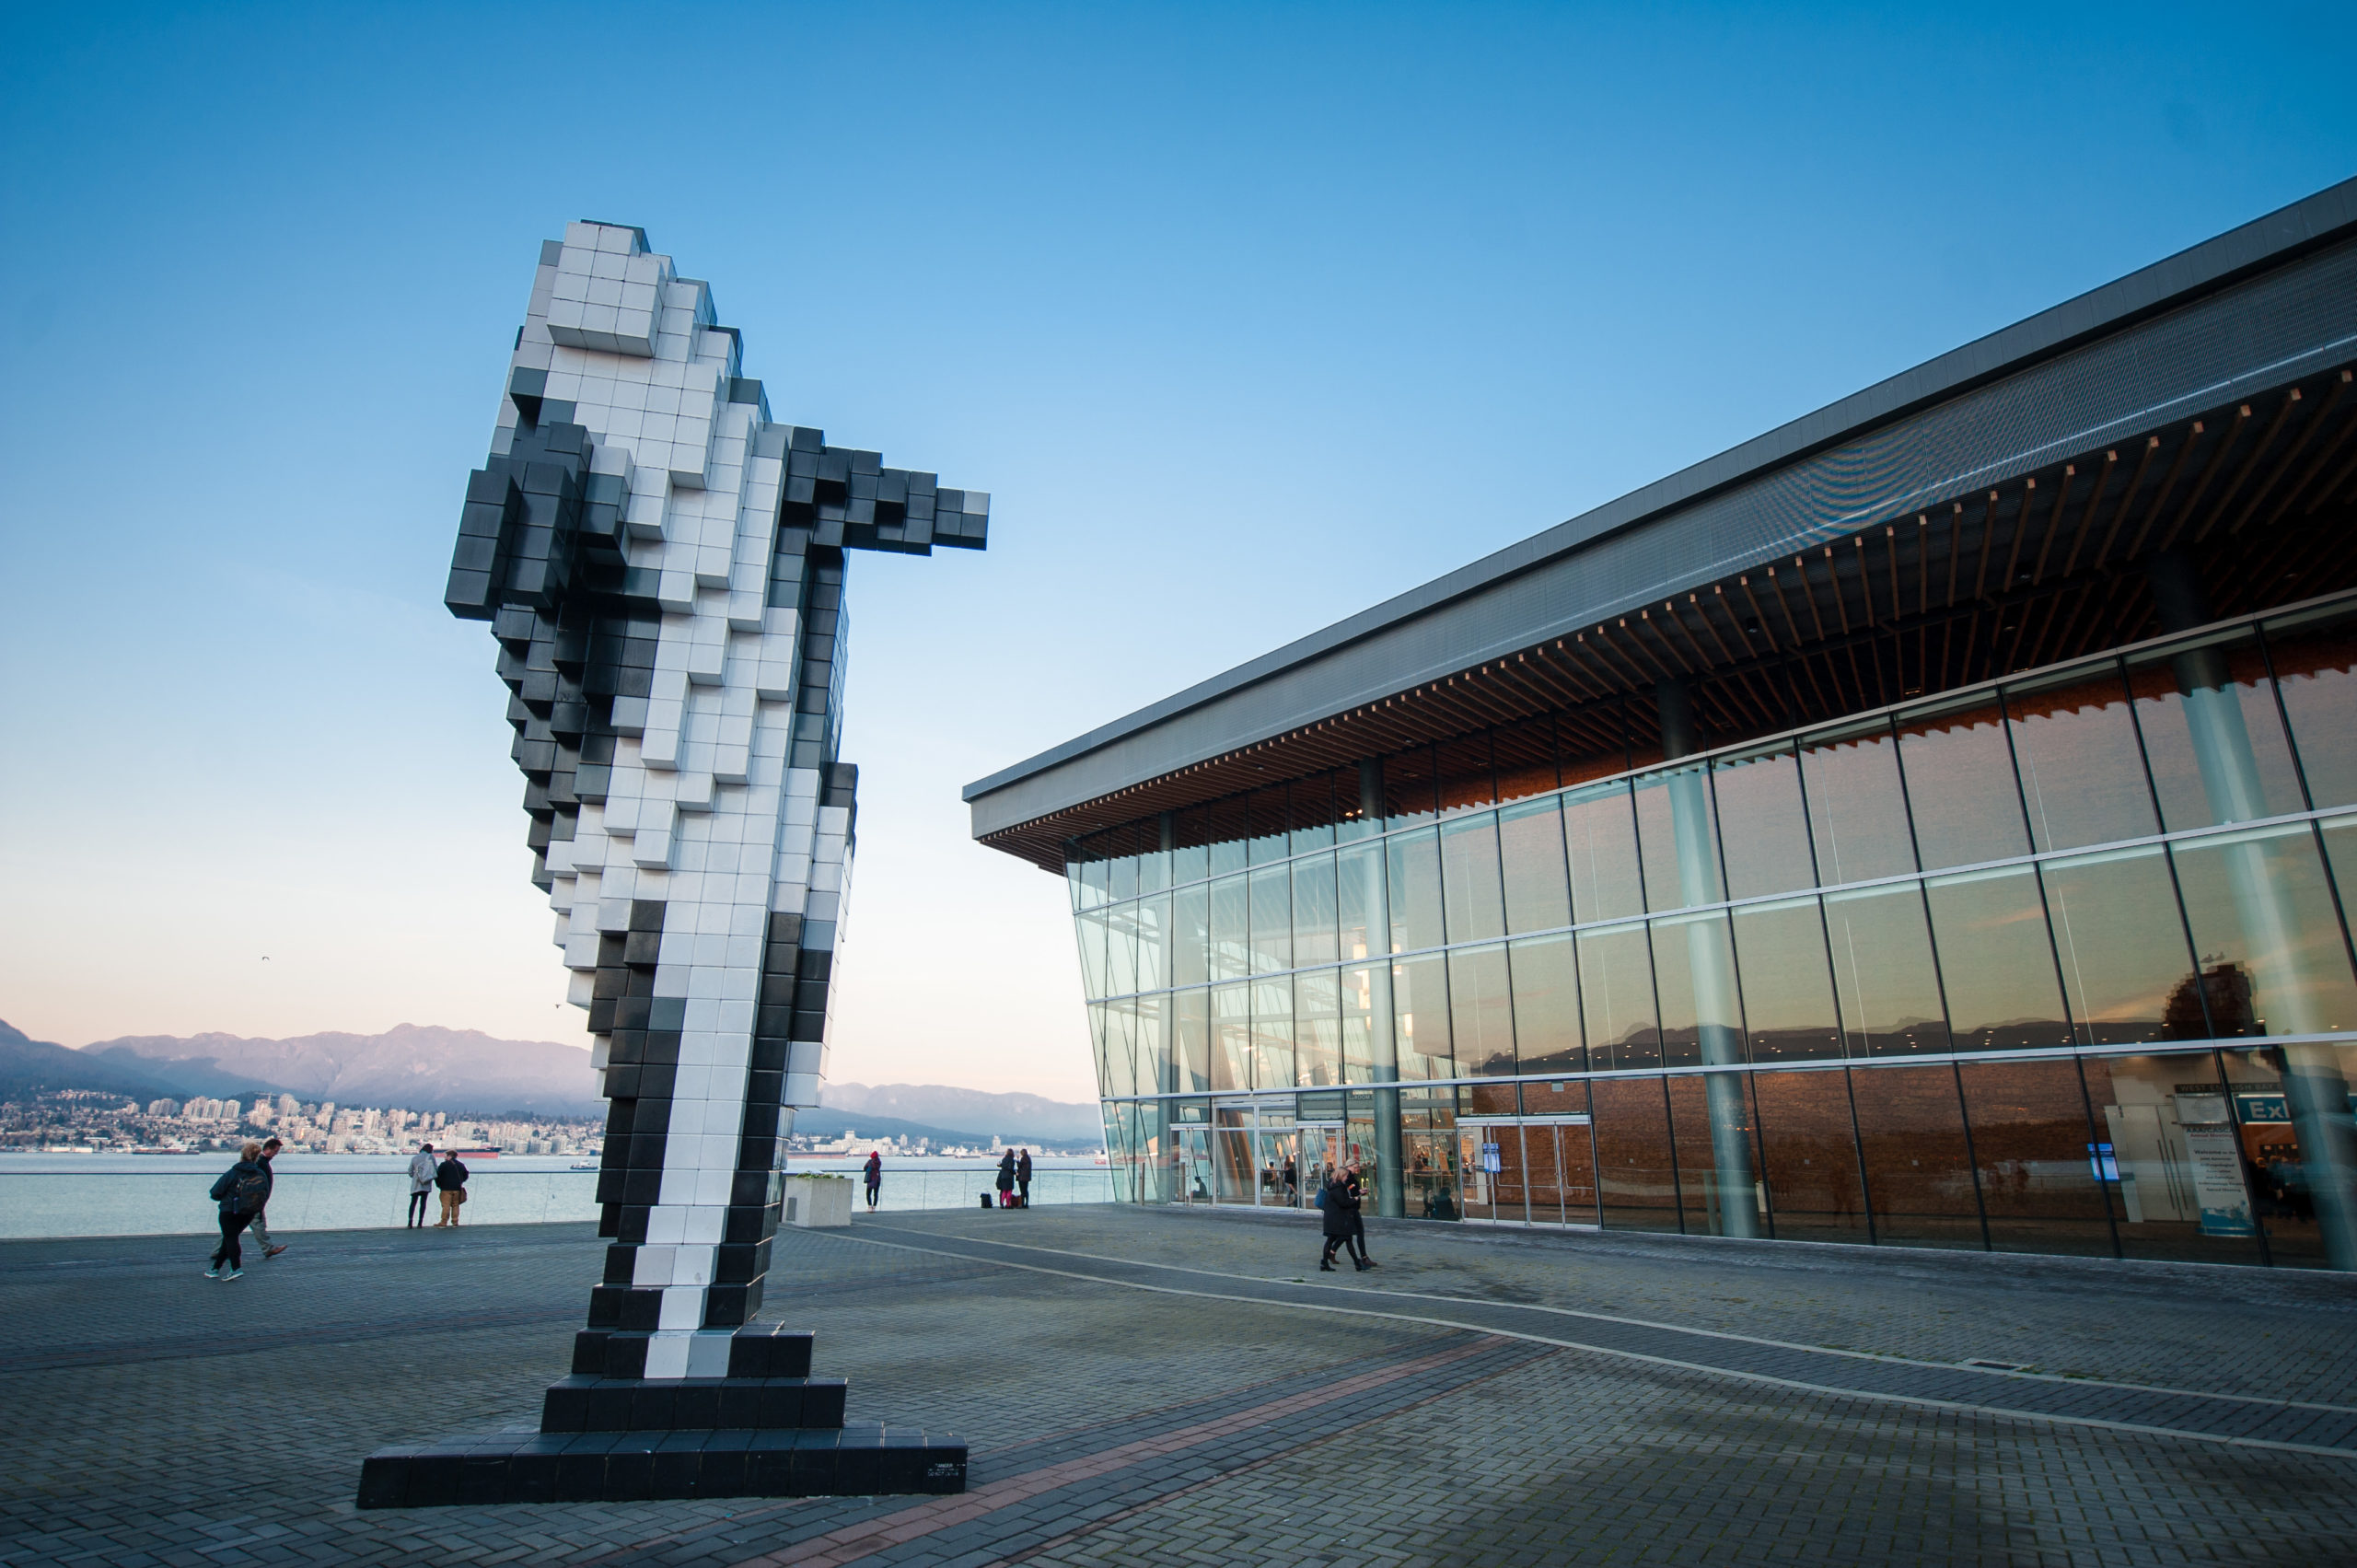 Photo of a courtyard and whale statue outside of the Vancouver Convention Center.